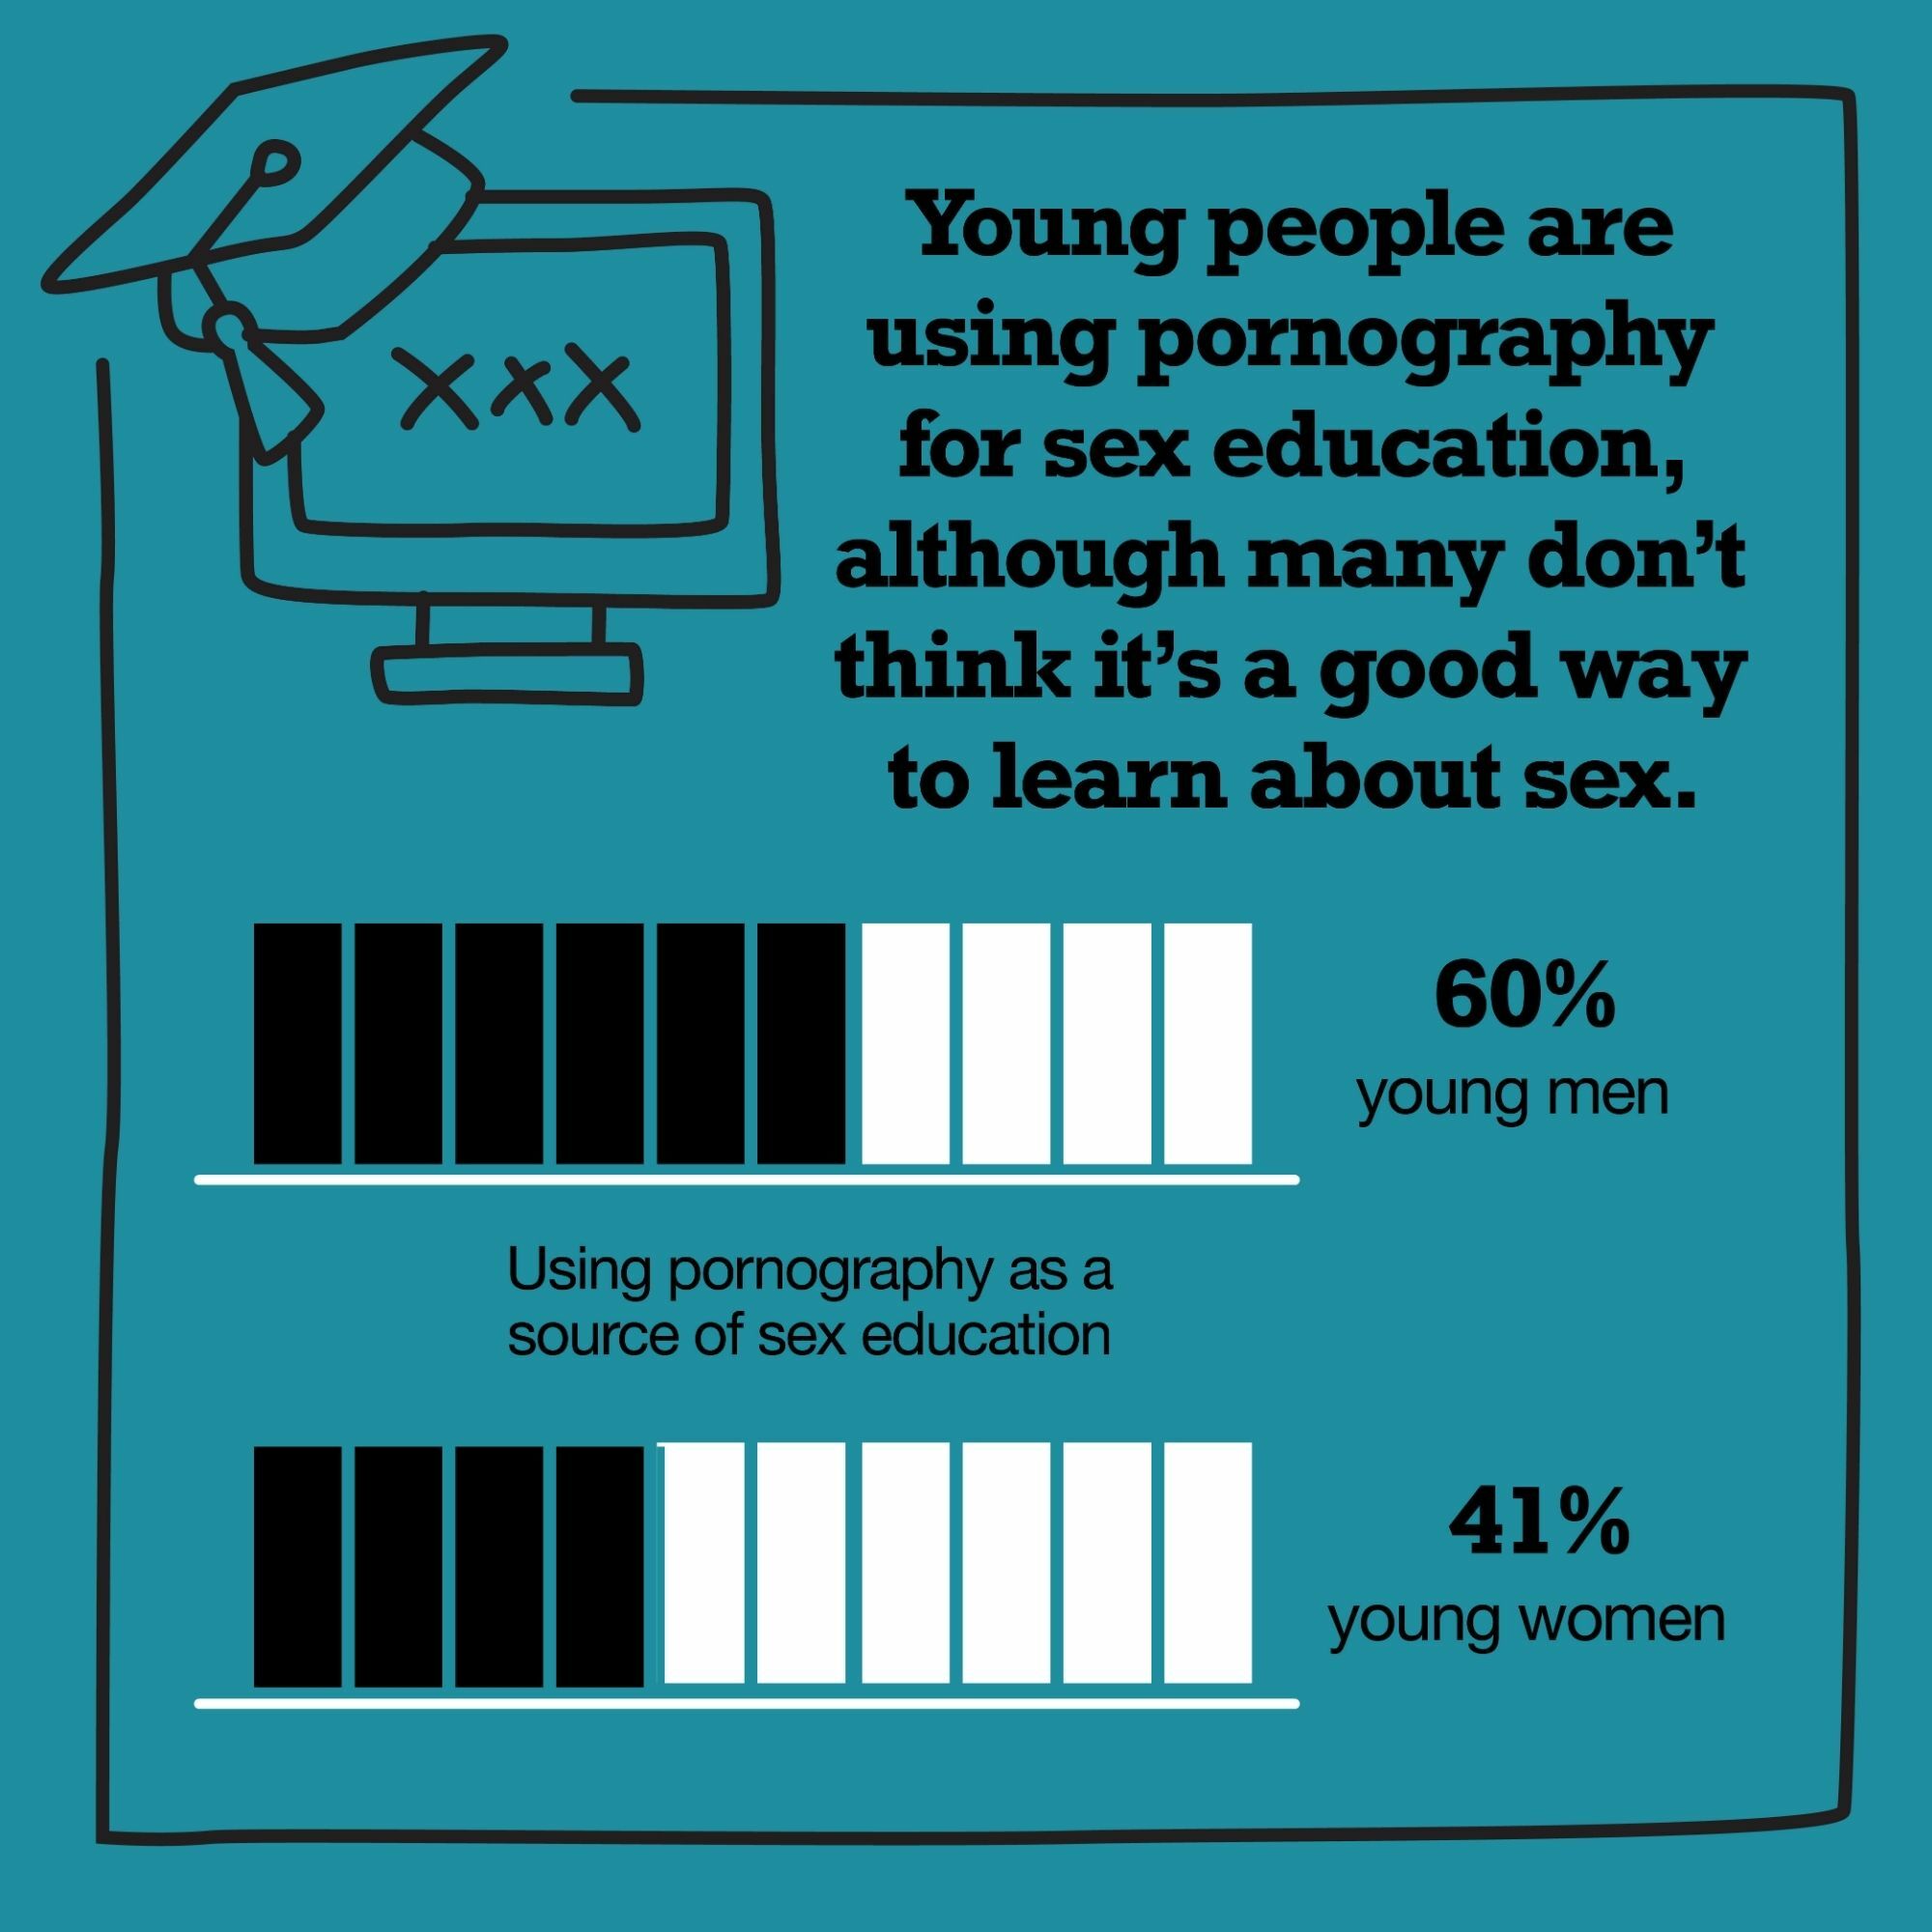 Educational - Watching Pornography for Education - The Risks | The Line | The Line